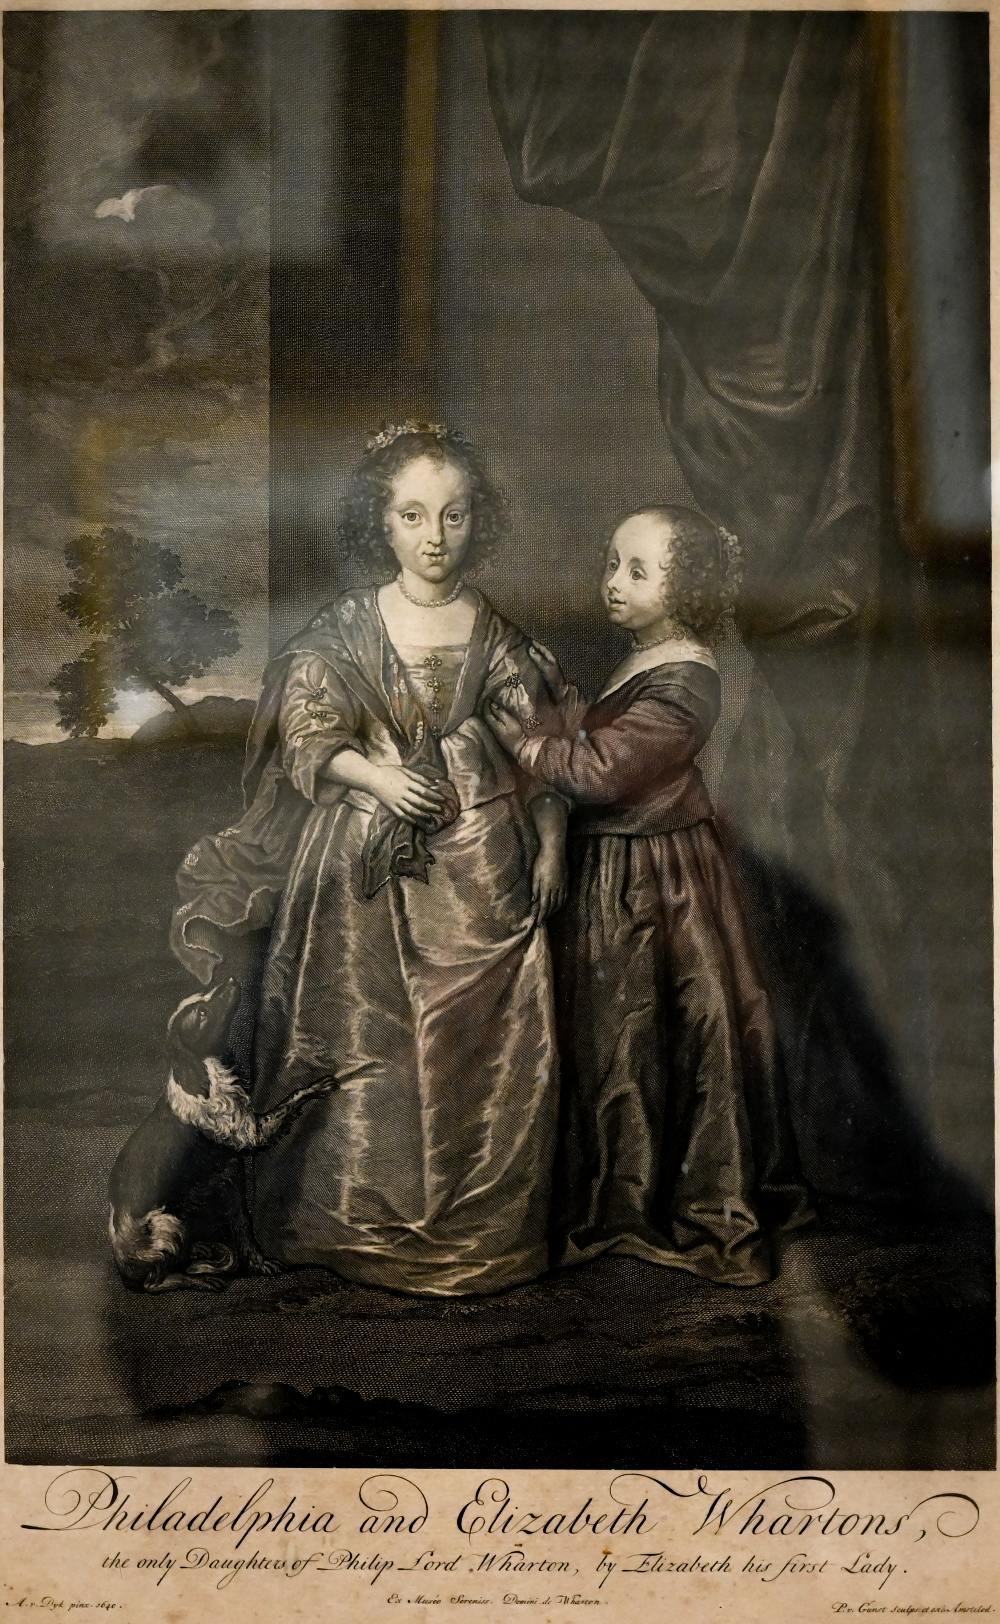 Two 18th century engravings - 'Philadelphia and Elizabeth Whartons', after van Dyck, by Gunst, 52 - Image 4 of 7